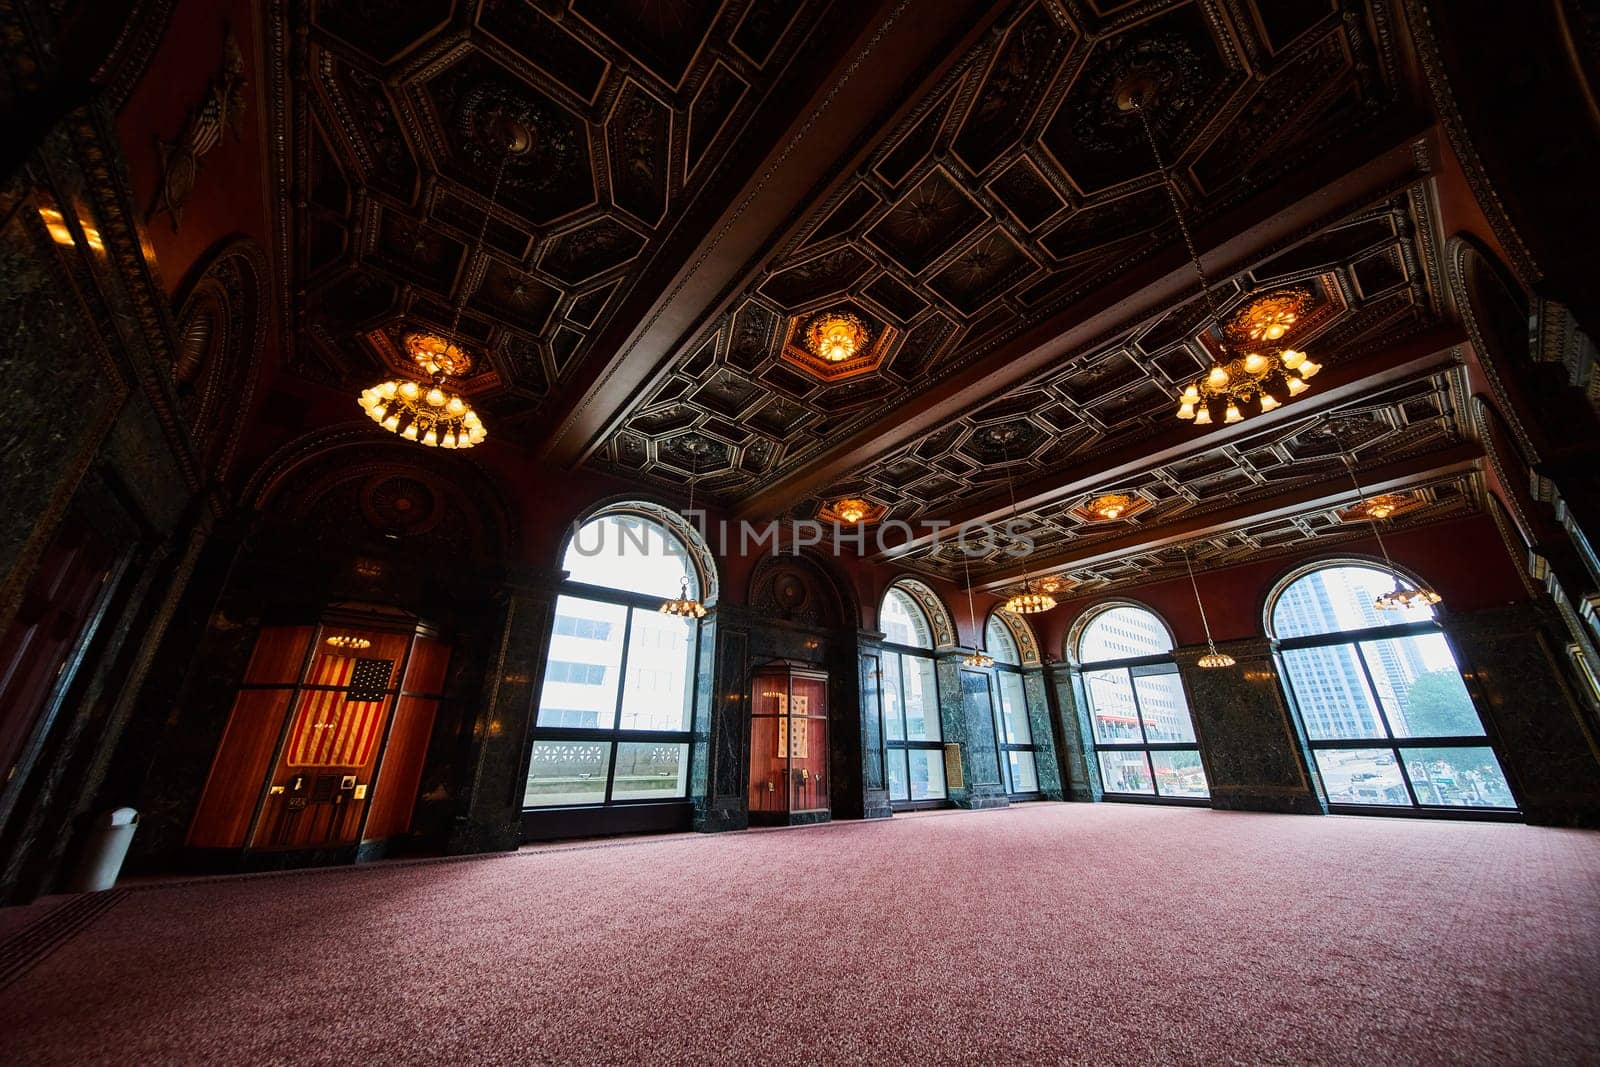 Image of Ornate empty space for business meetings, catering, or reception hall, patriotic American flag